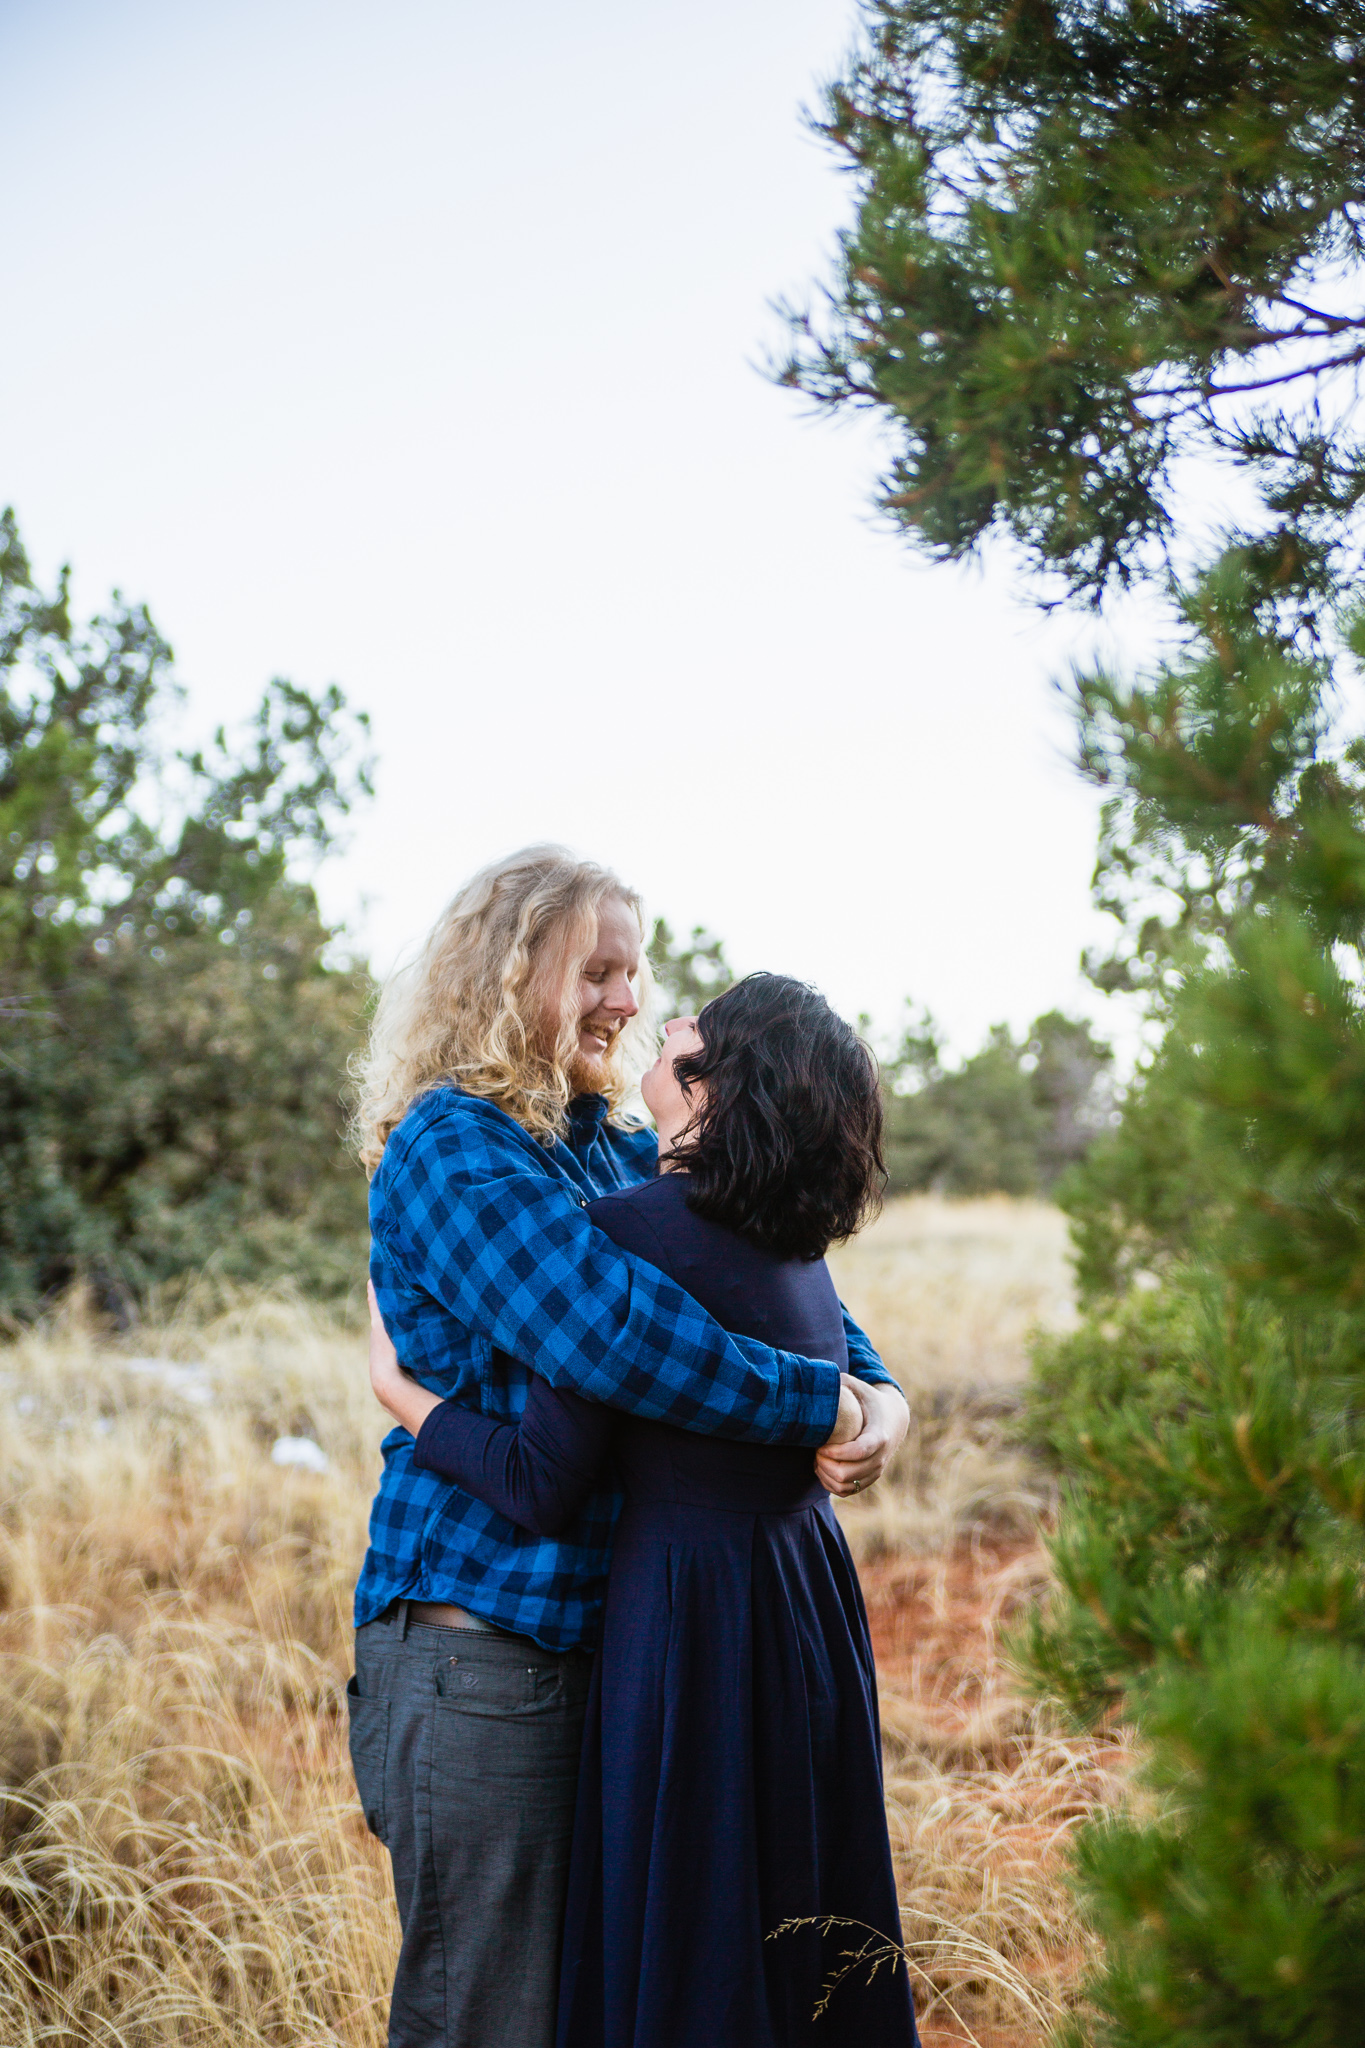 Couple looking at each other in navy and grey outfits during engagement session in Sedona Arizona by PMA Photography.